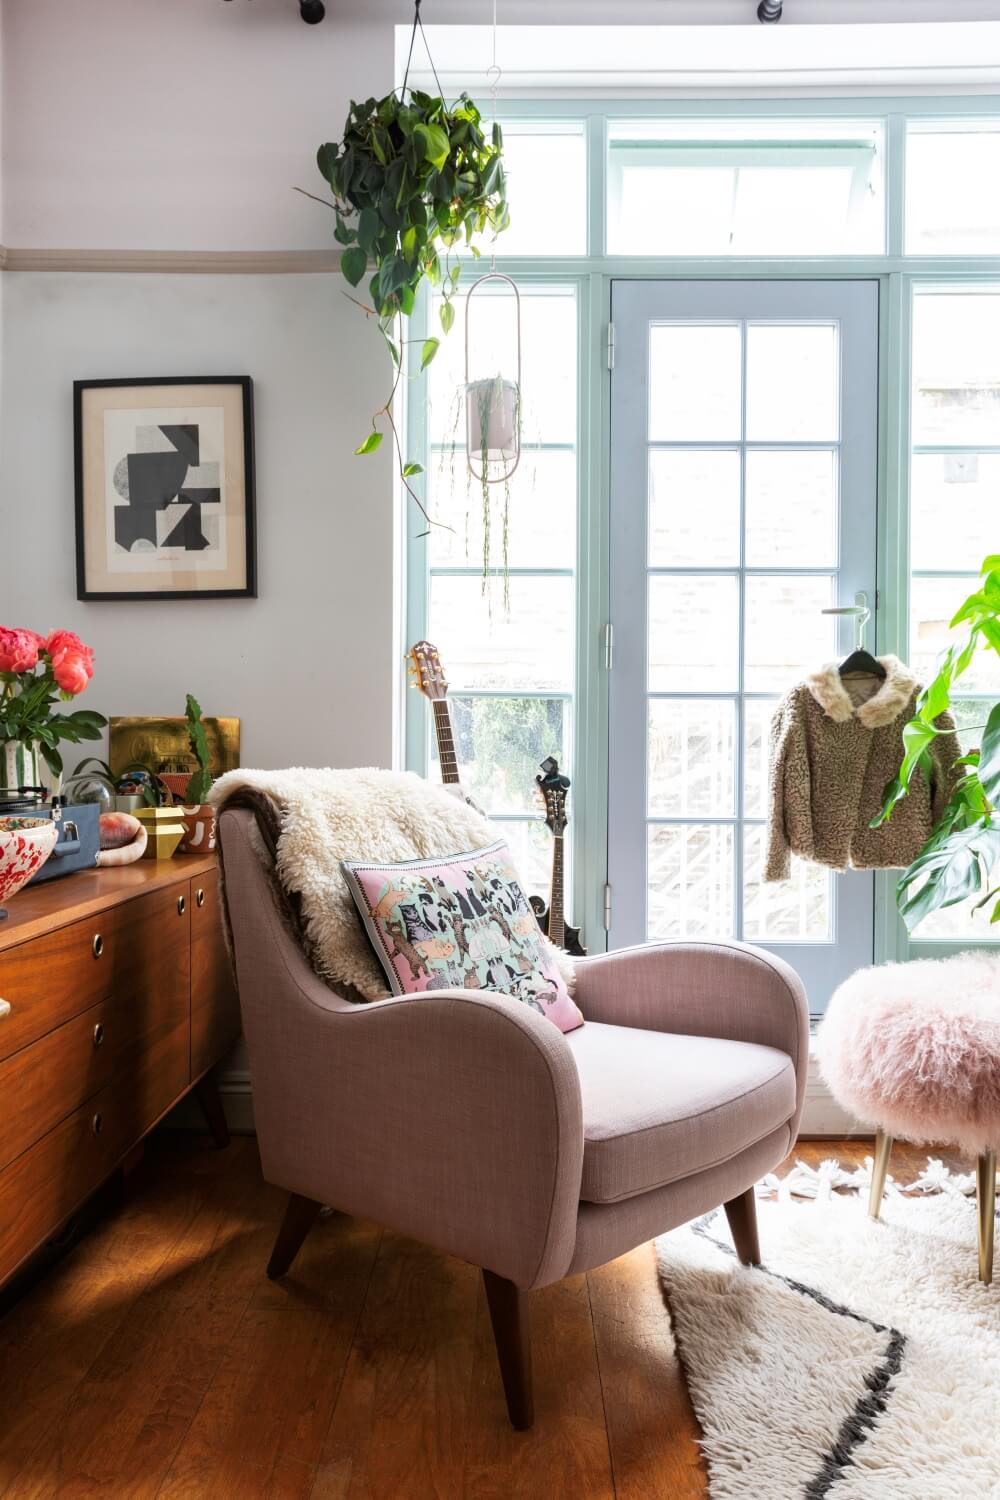 pink arm chair in front of large pale blue windows in listed property. Indoor plants suspended from curtain rails